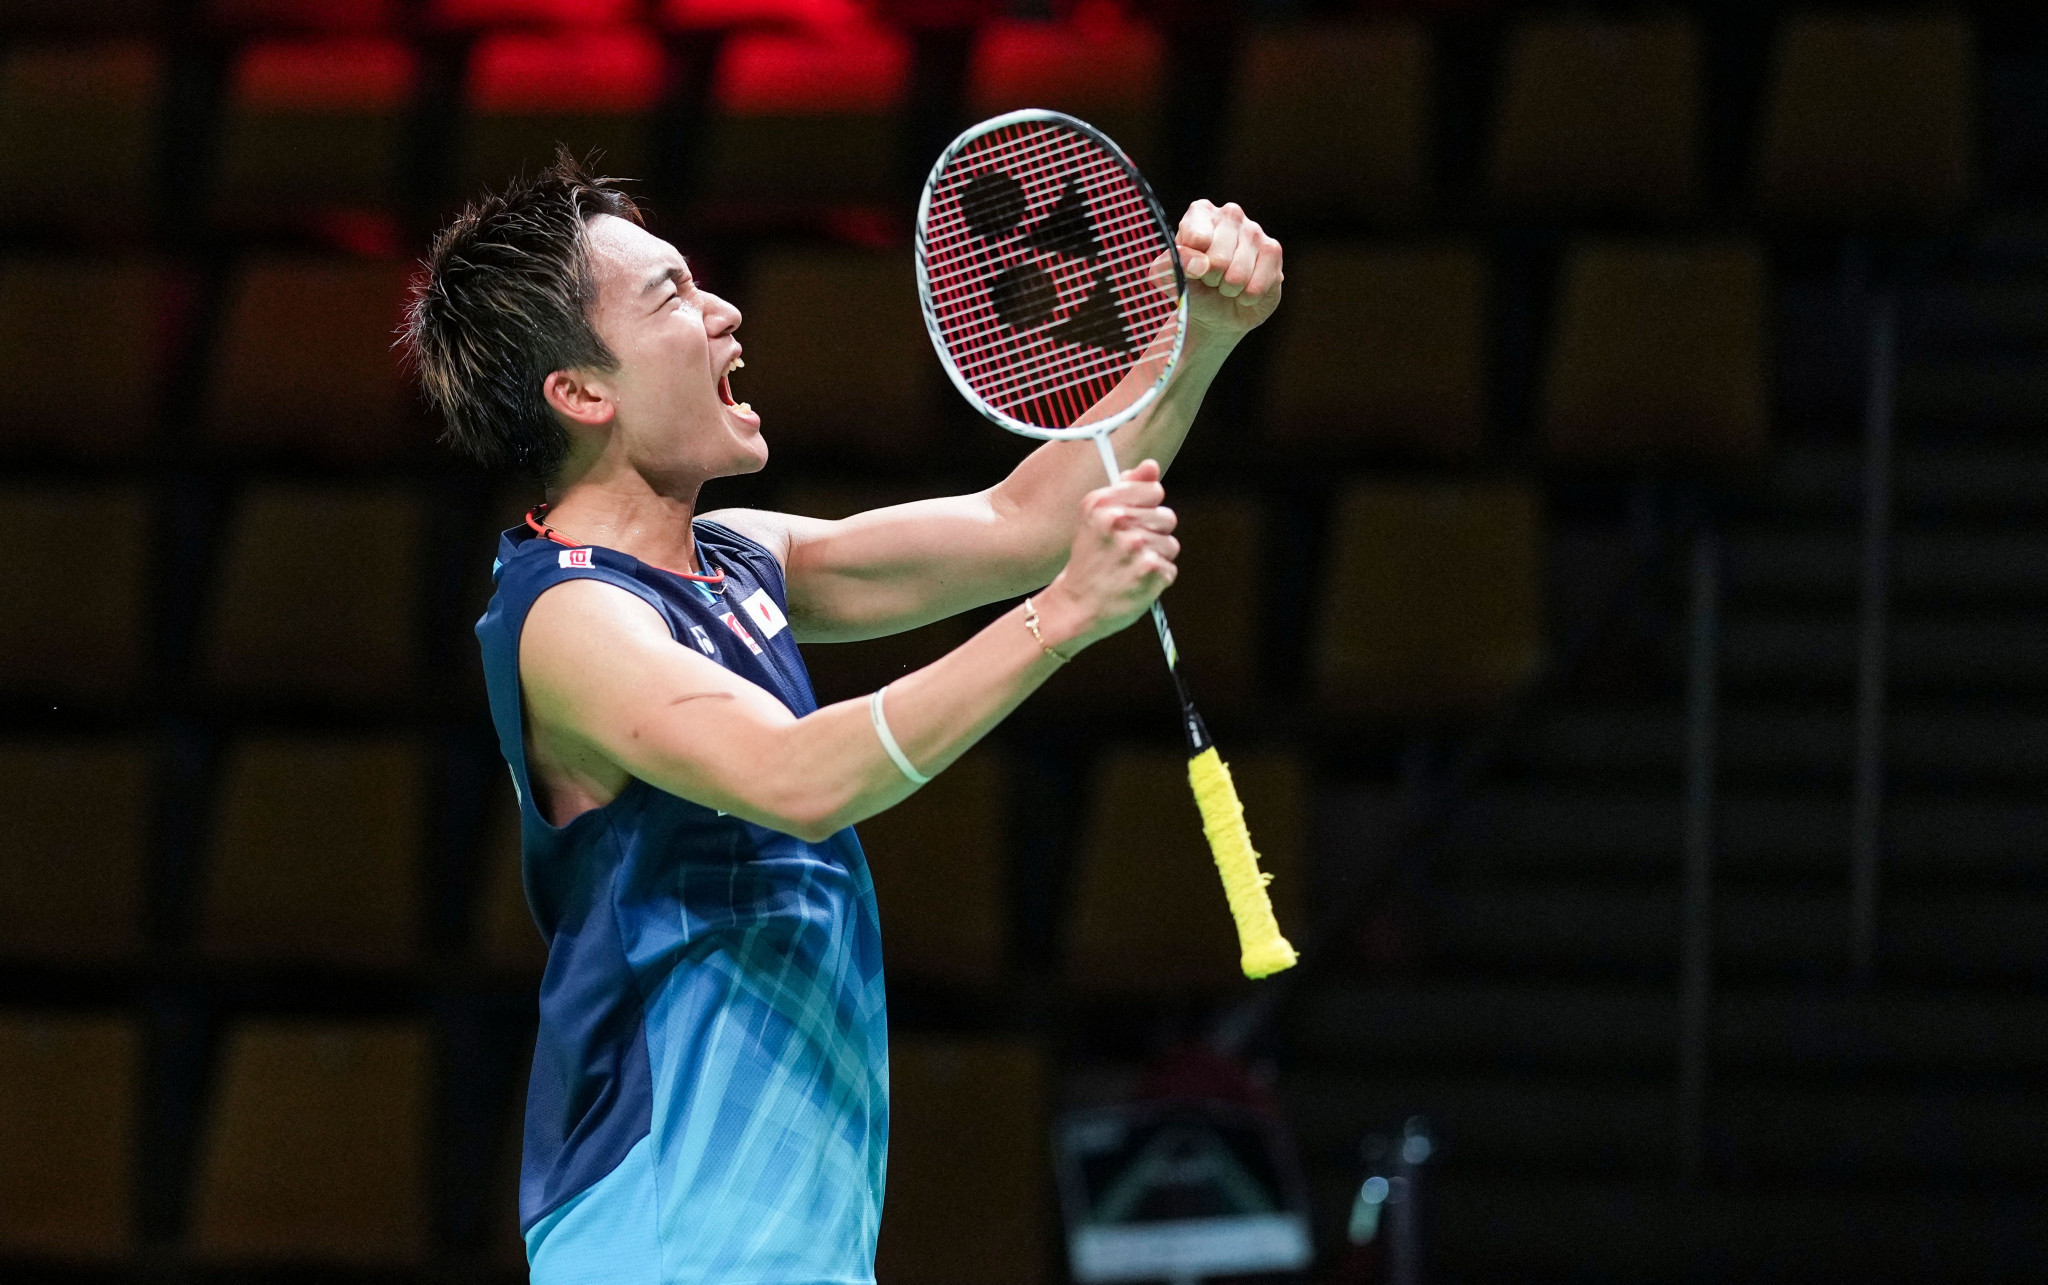 Depleted field set to help young shuttlers at Badminton Asia Team Championships